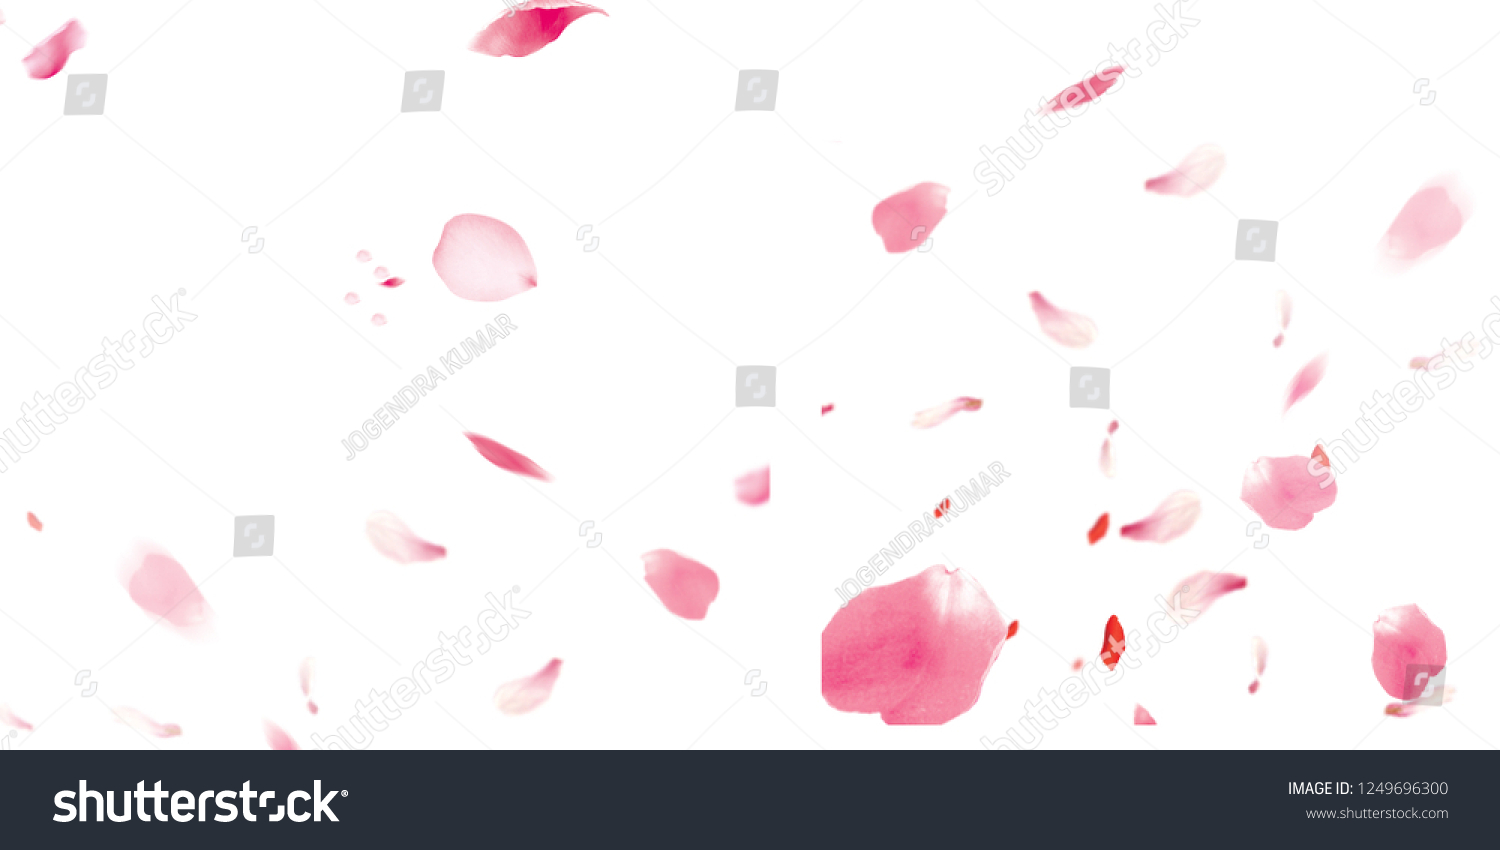 Petals Stock Image with blur effect #1249696300